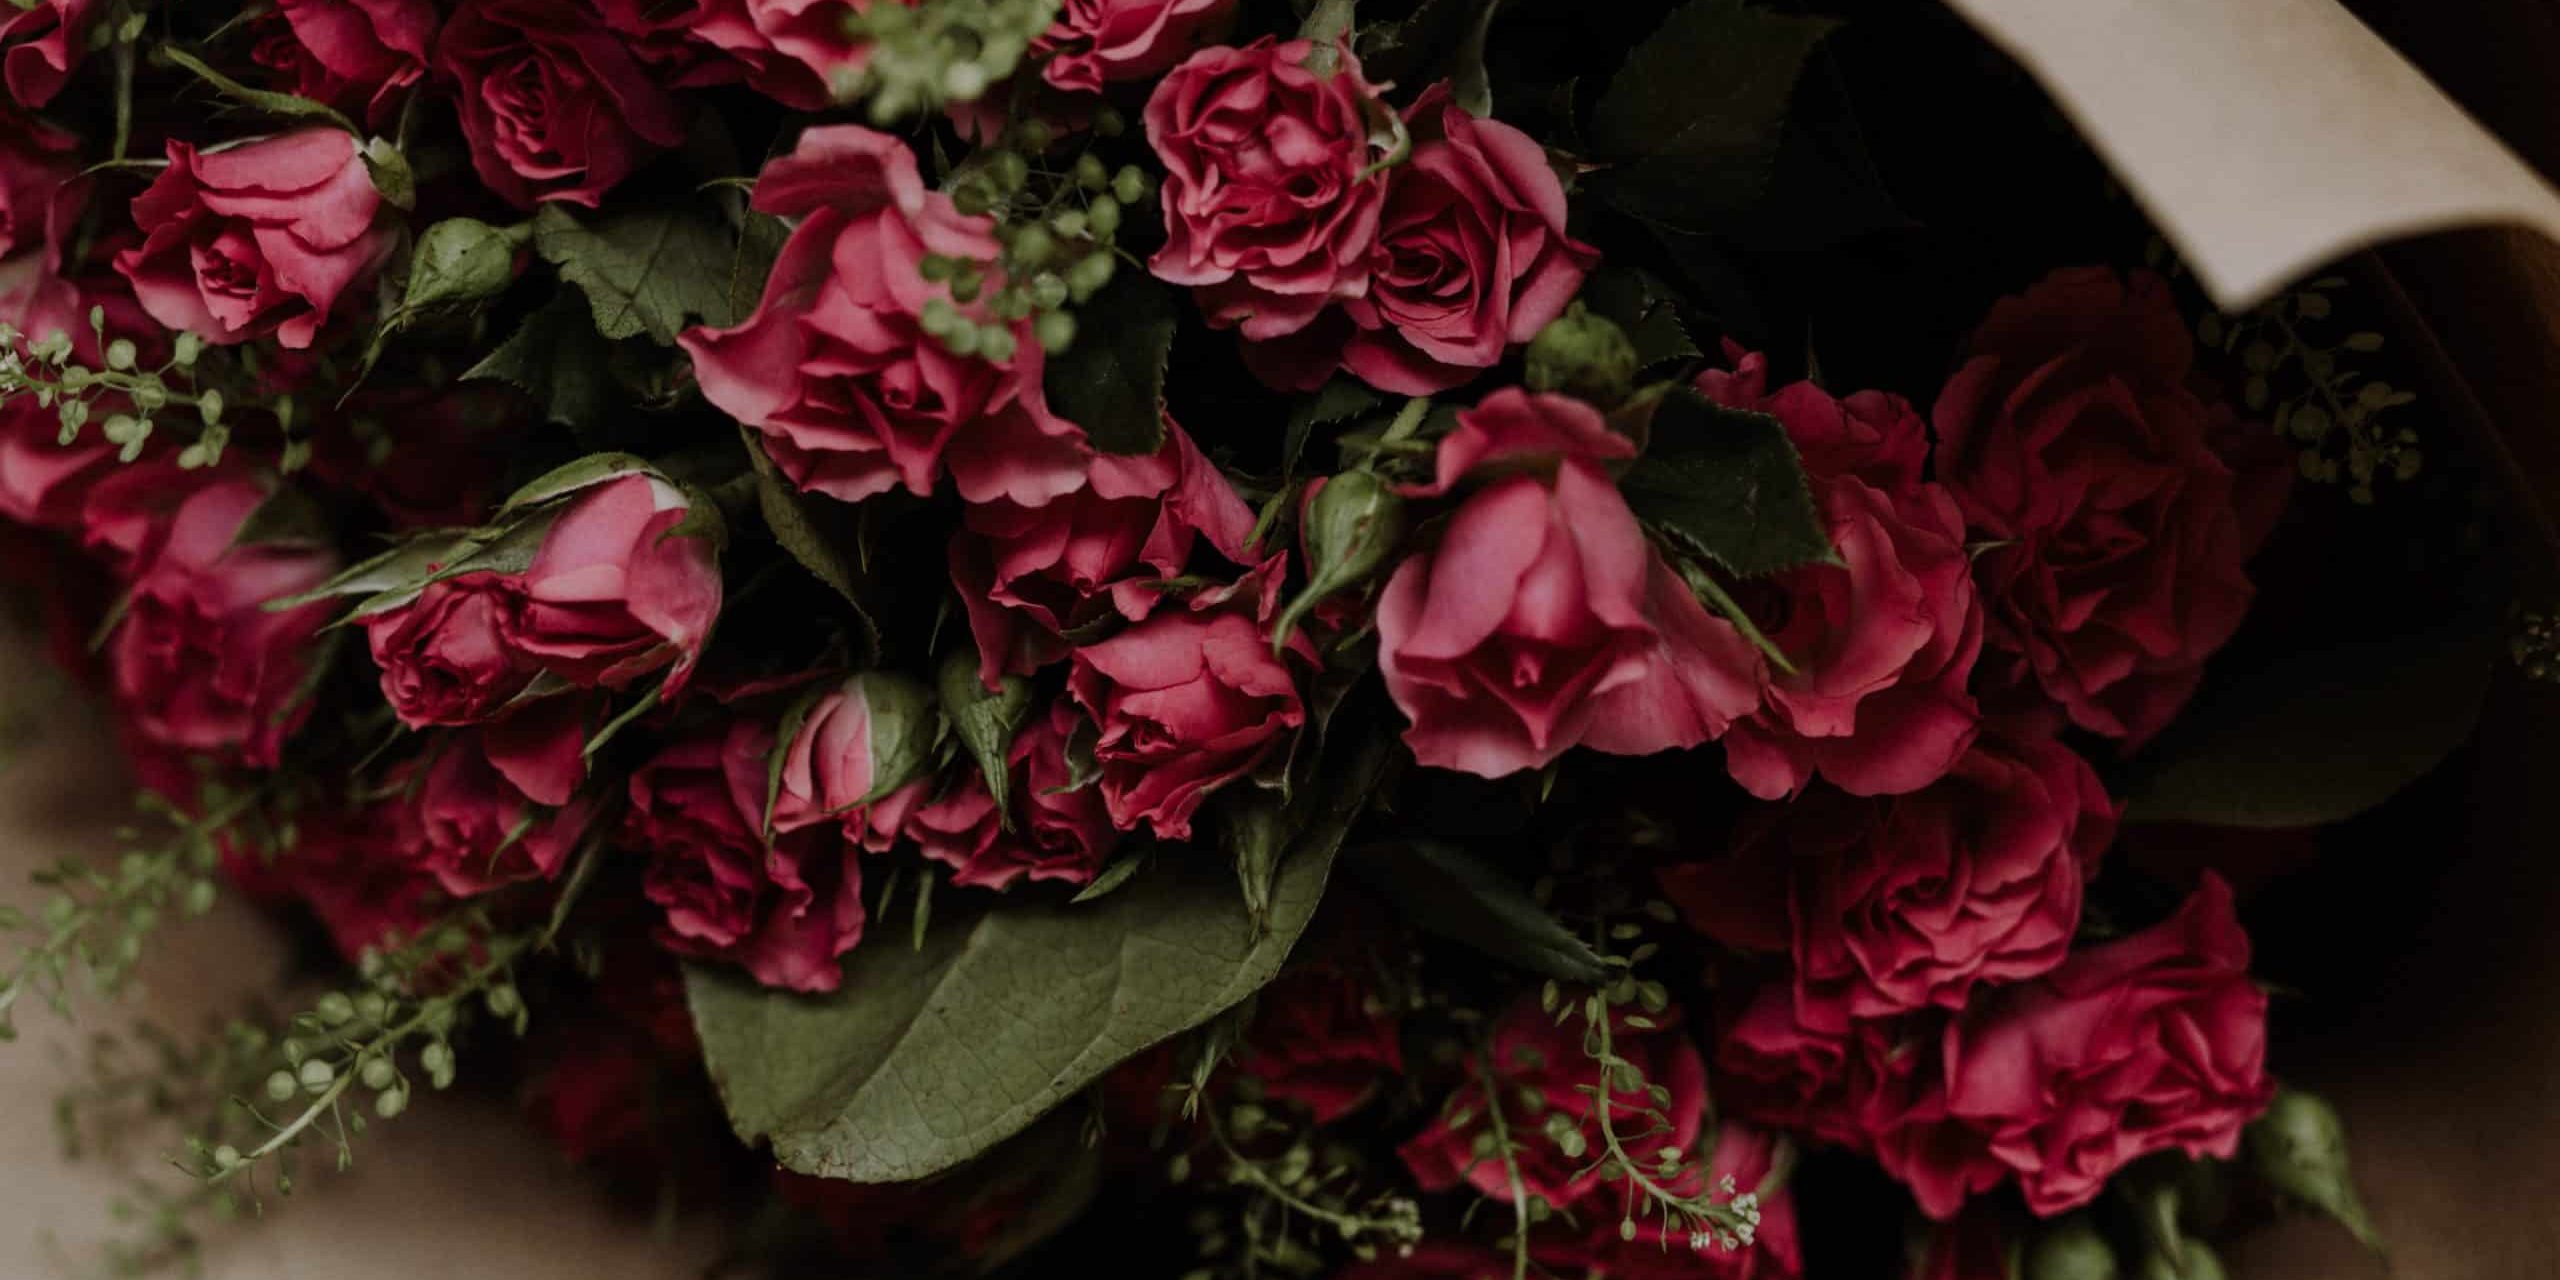 moody-shot-of-pink-flowers-bouquet-with-greens-2023-11-27-05-02-03-utc